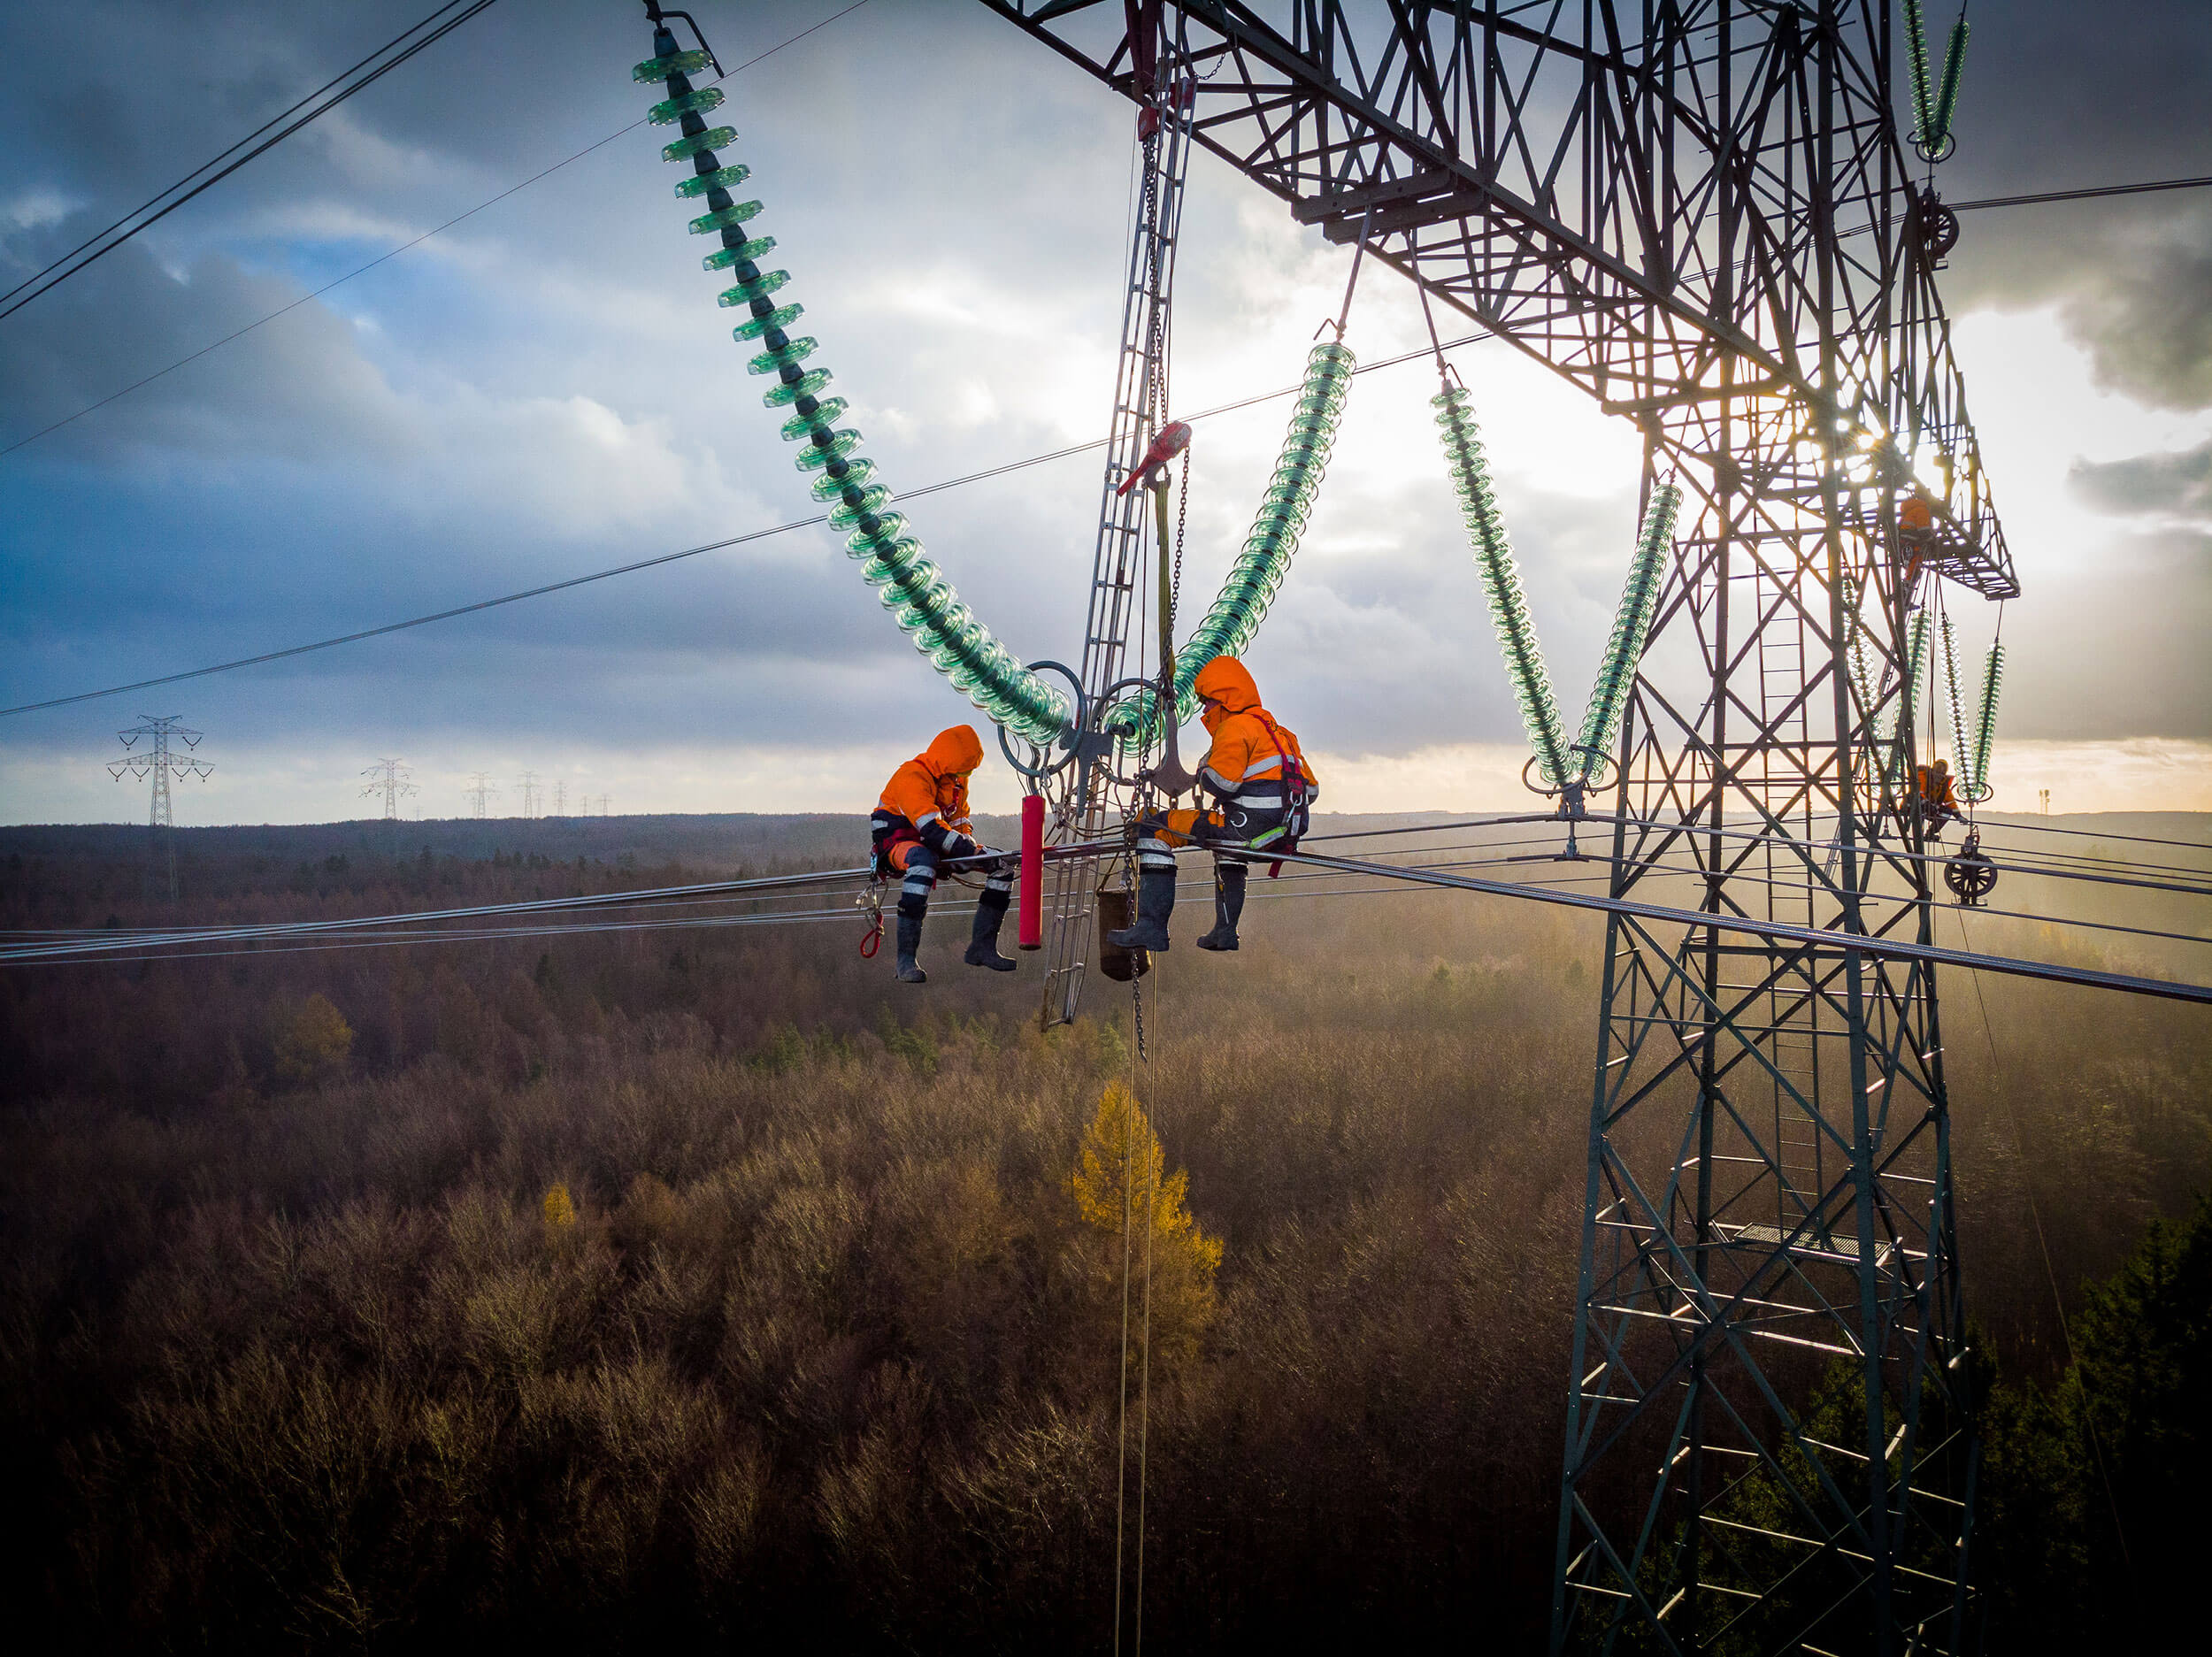 POMERANIA DISTRICT,POLAND - DECEMBER 8,2018: Aerial view of electricians working on electric poles to install and repair power lines.